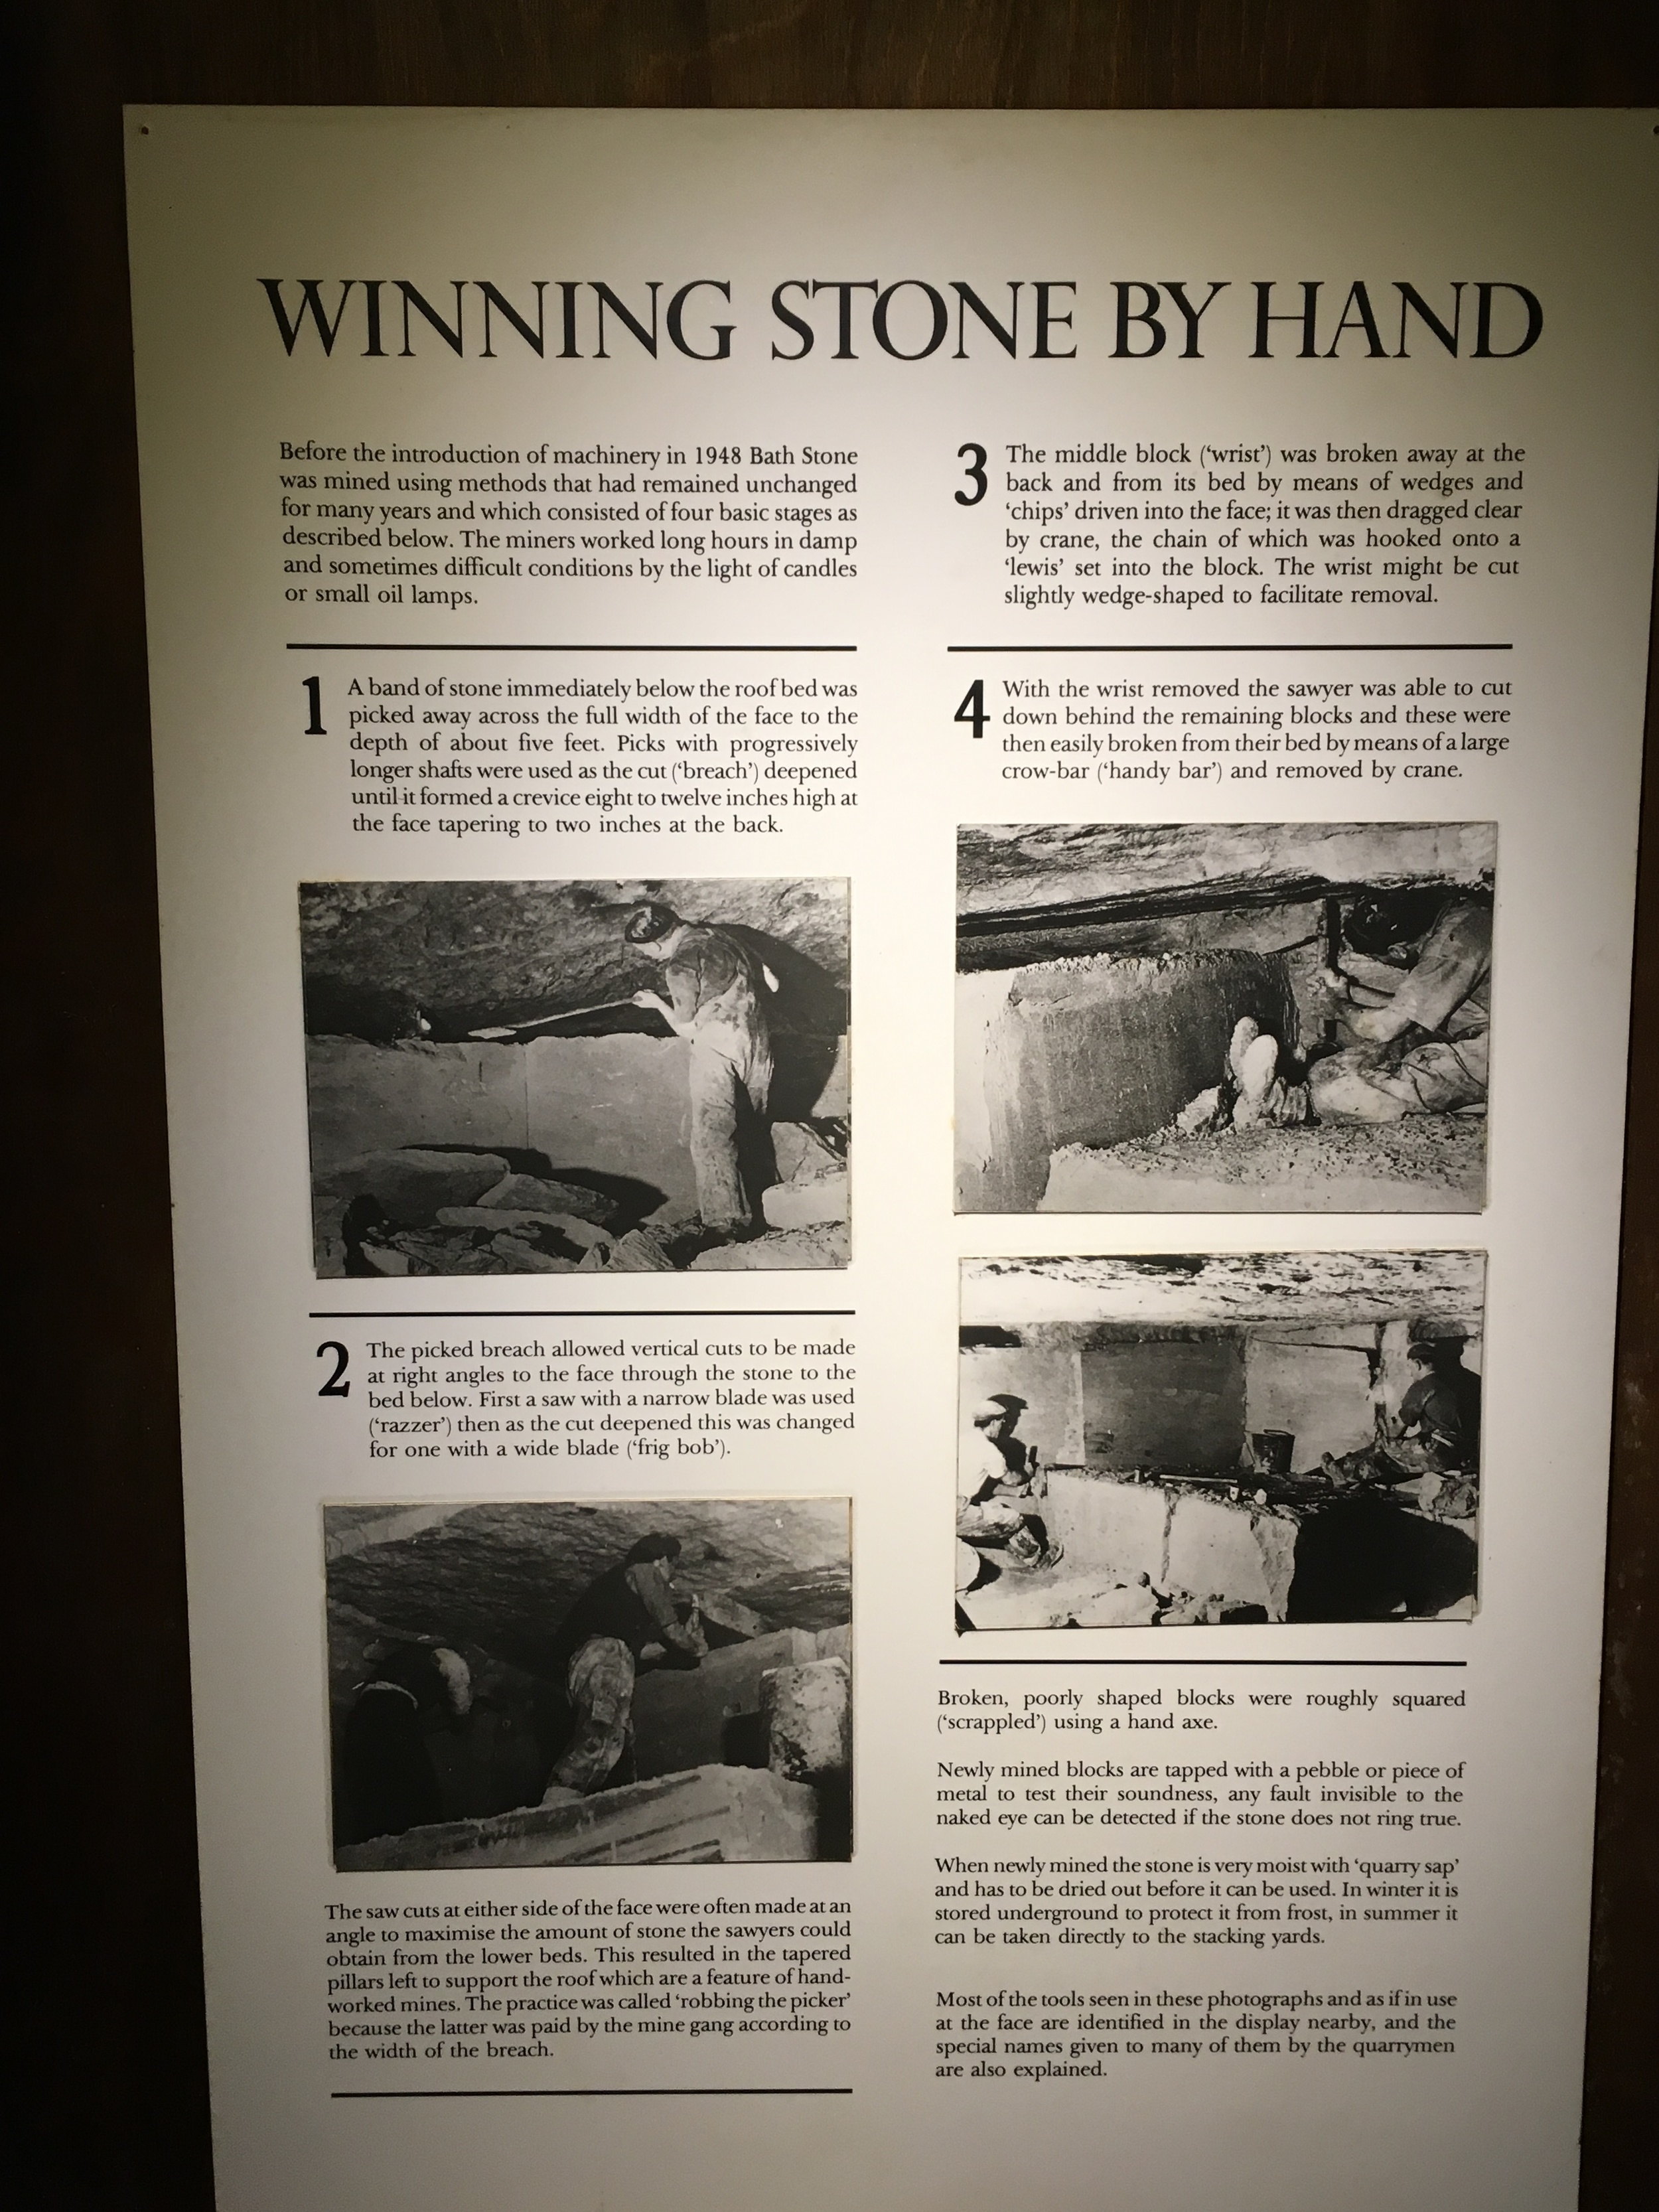  An explanation of the process of winning stone. 